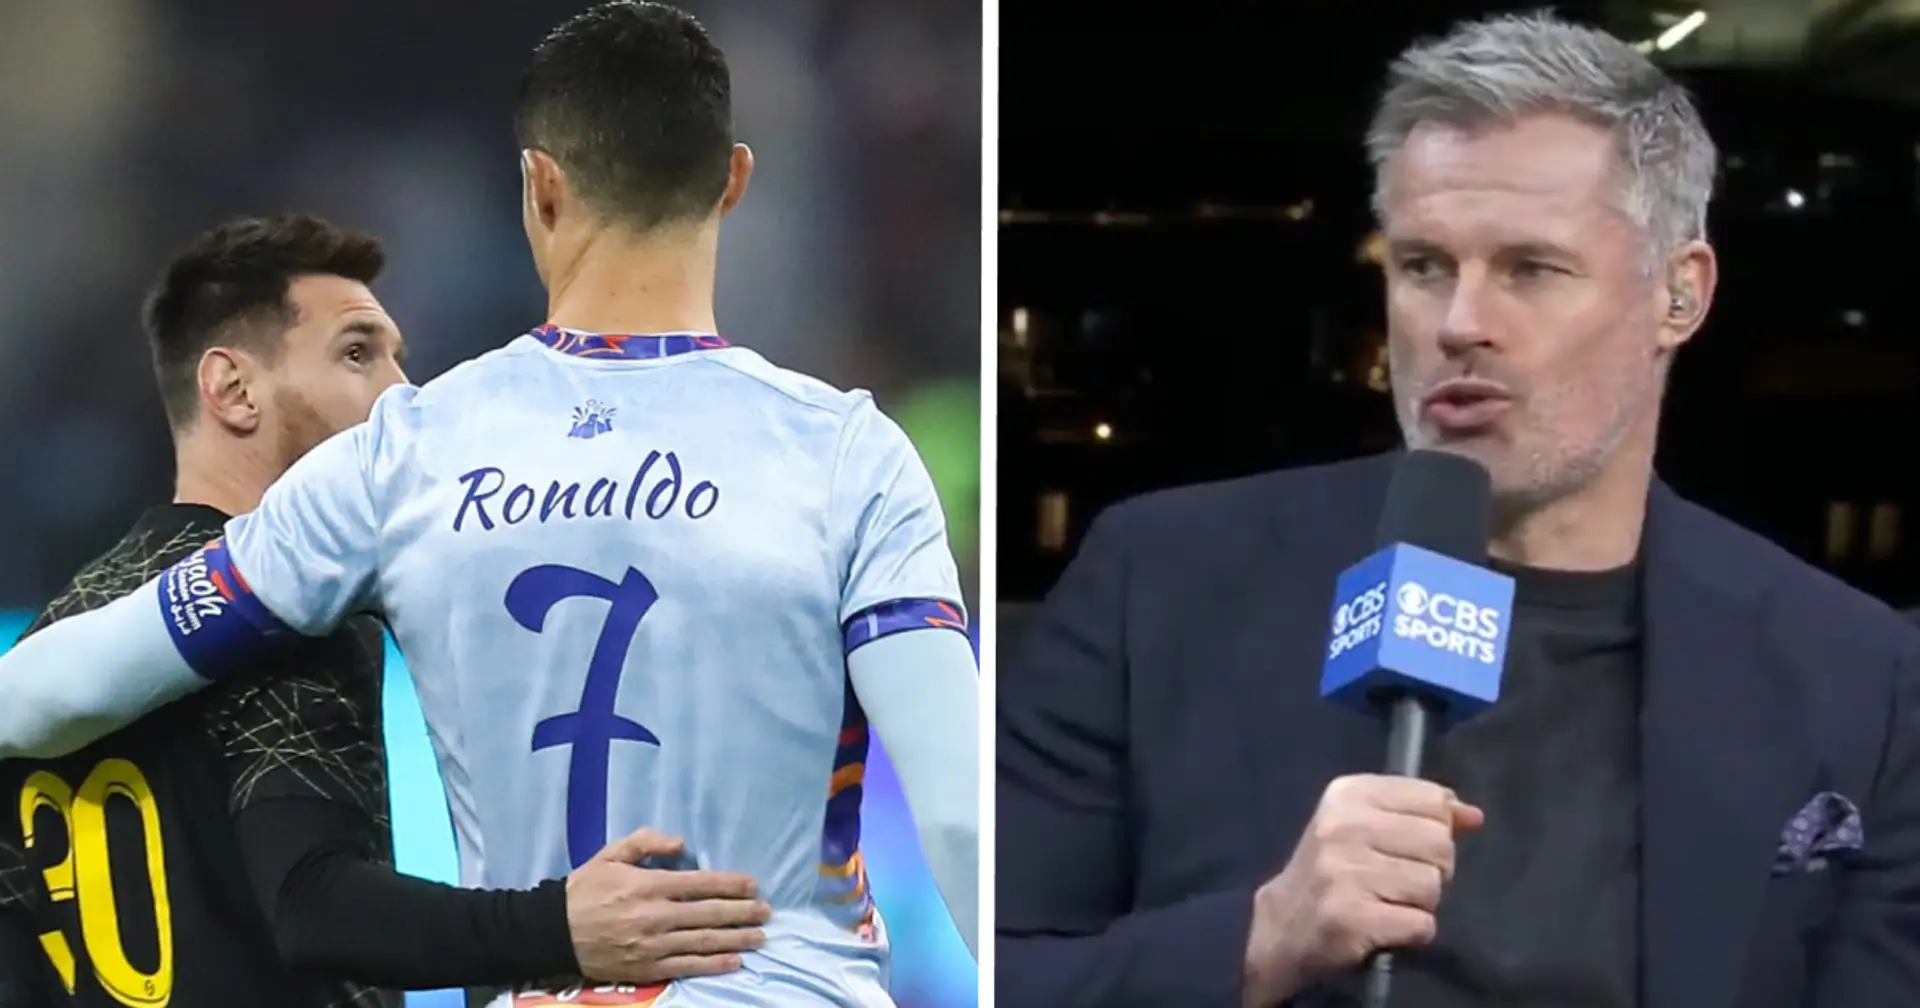 'It was never a debate': Liverpool icon Carragher causes outrage with take on Messi-Ronaldo debate